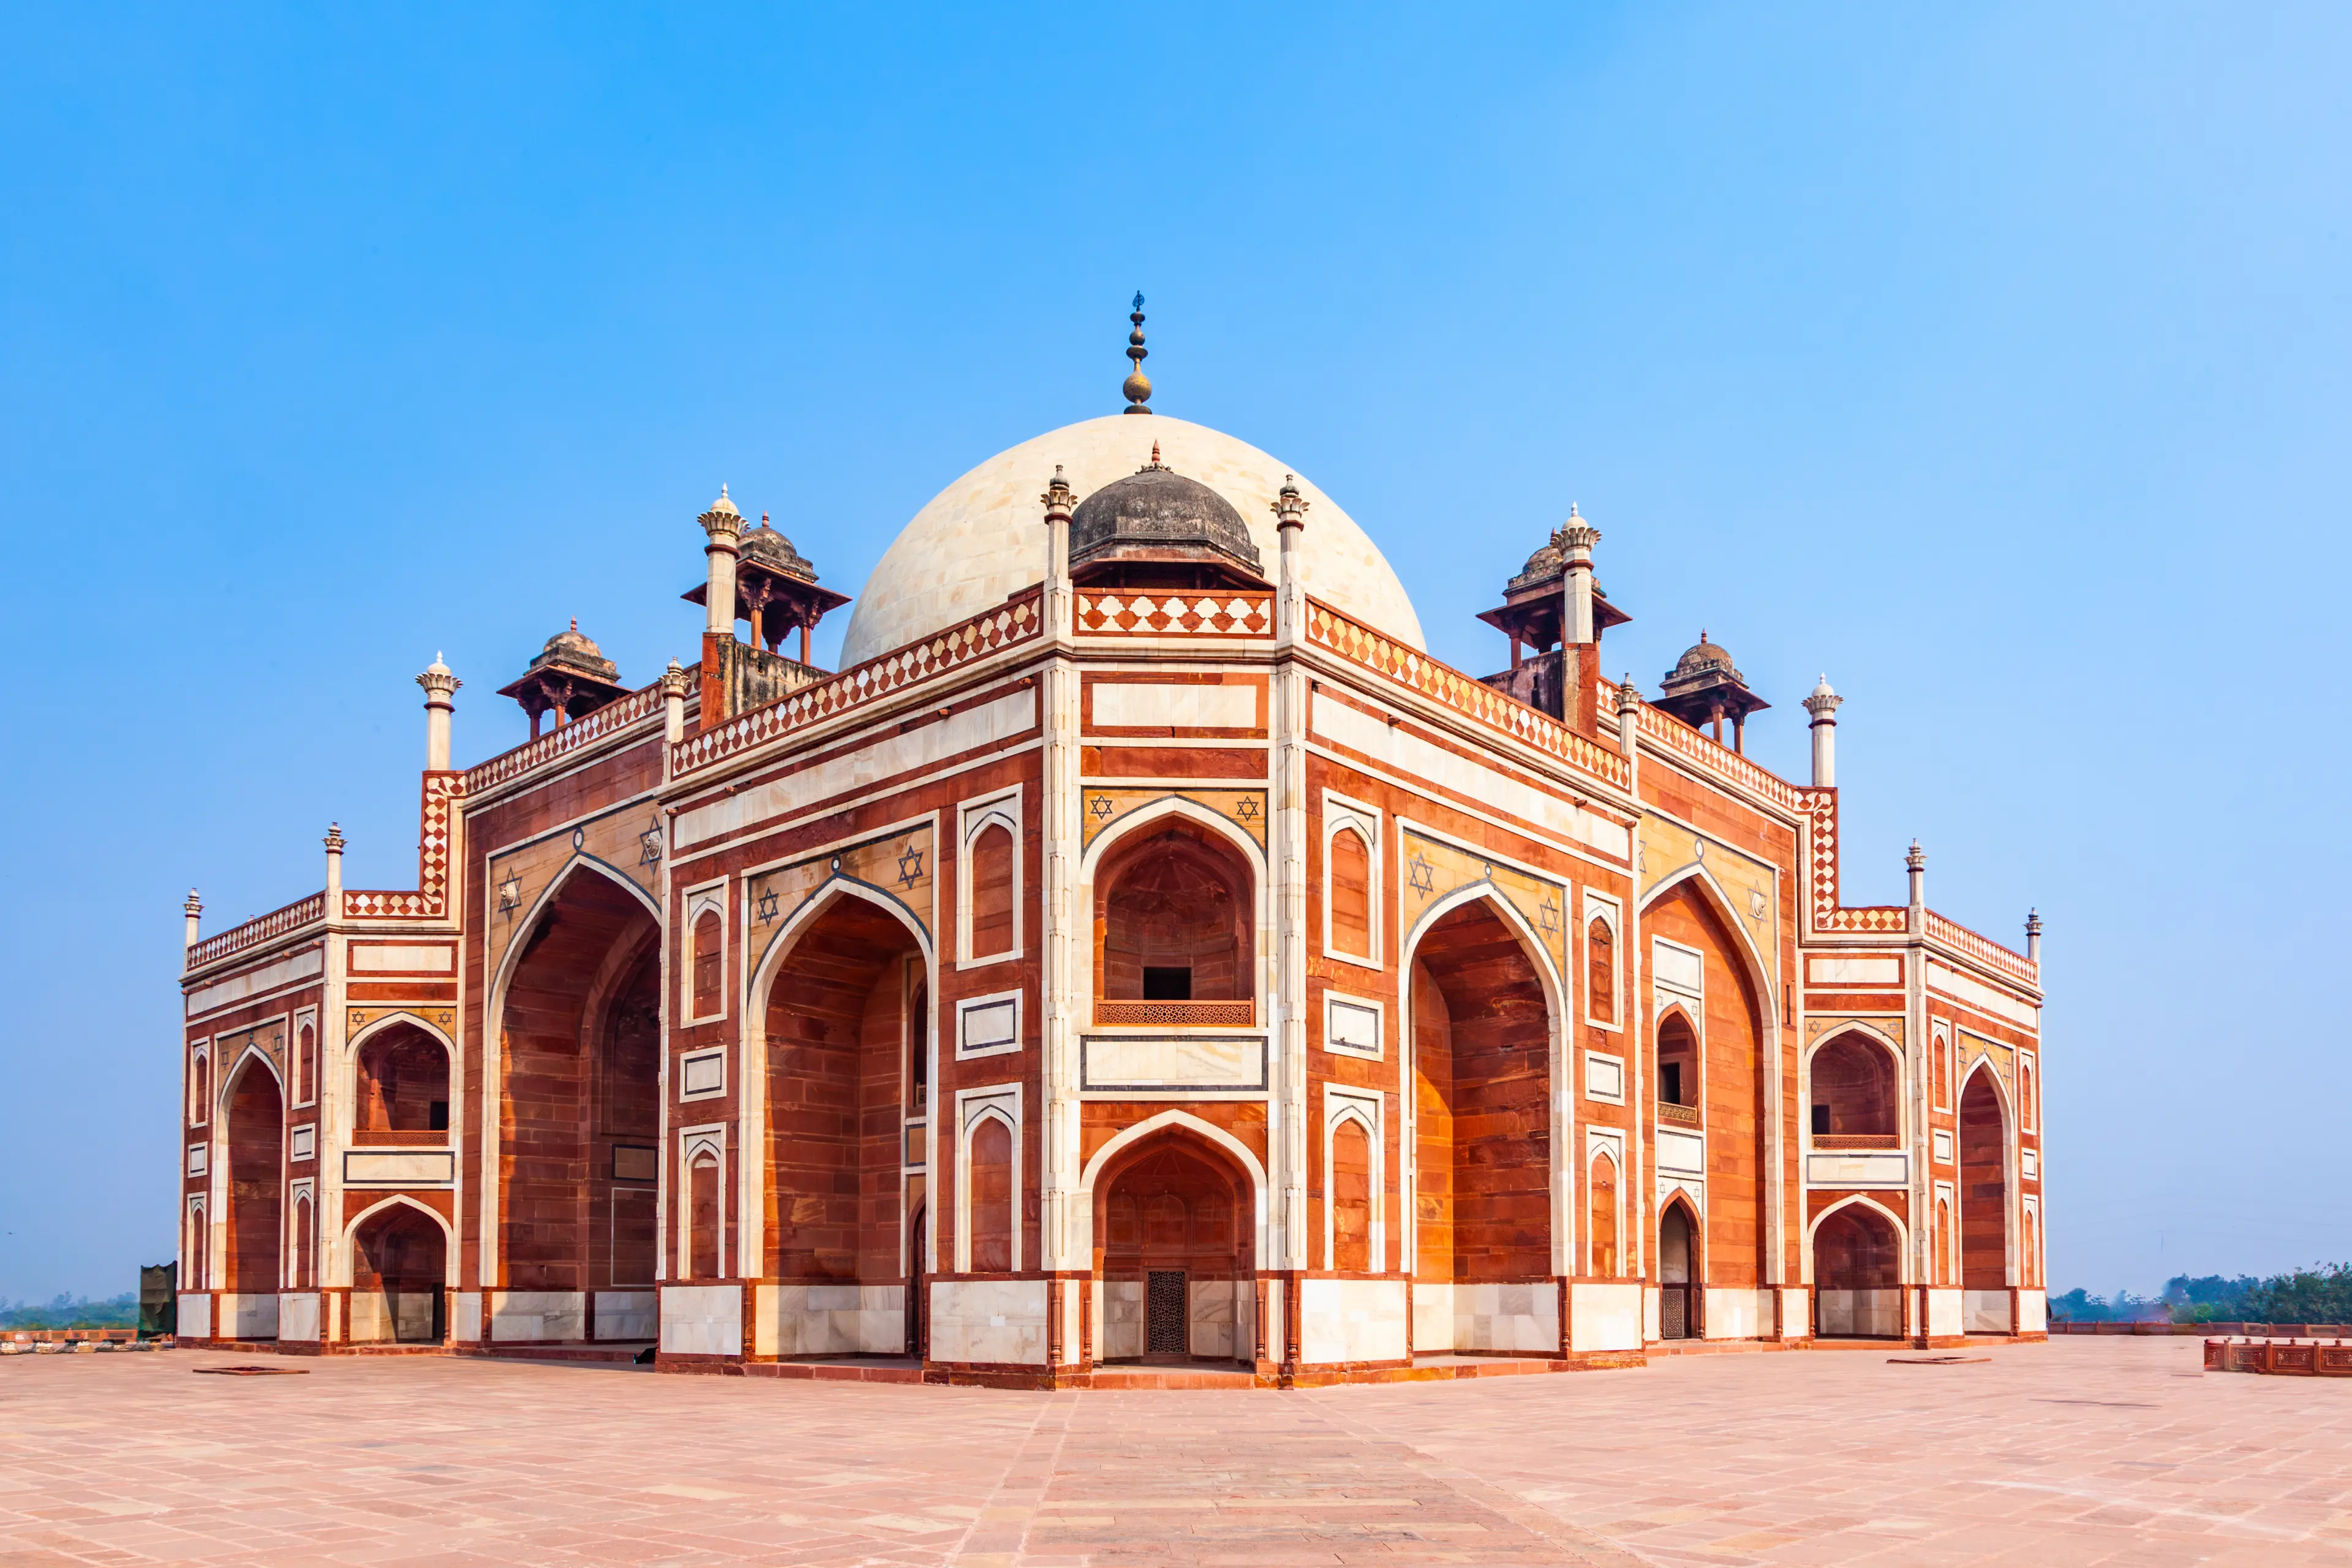 1-Day Family Adventure: Local Delights and Sights in New Delhi